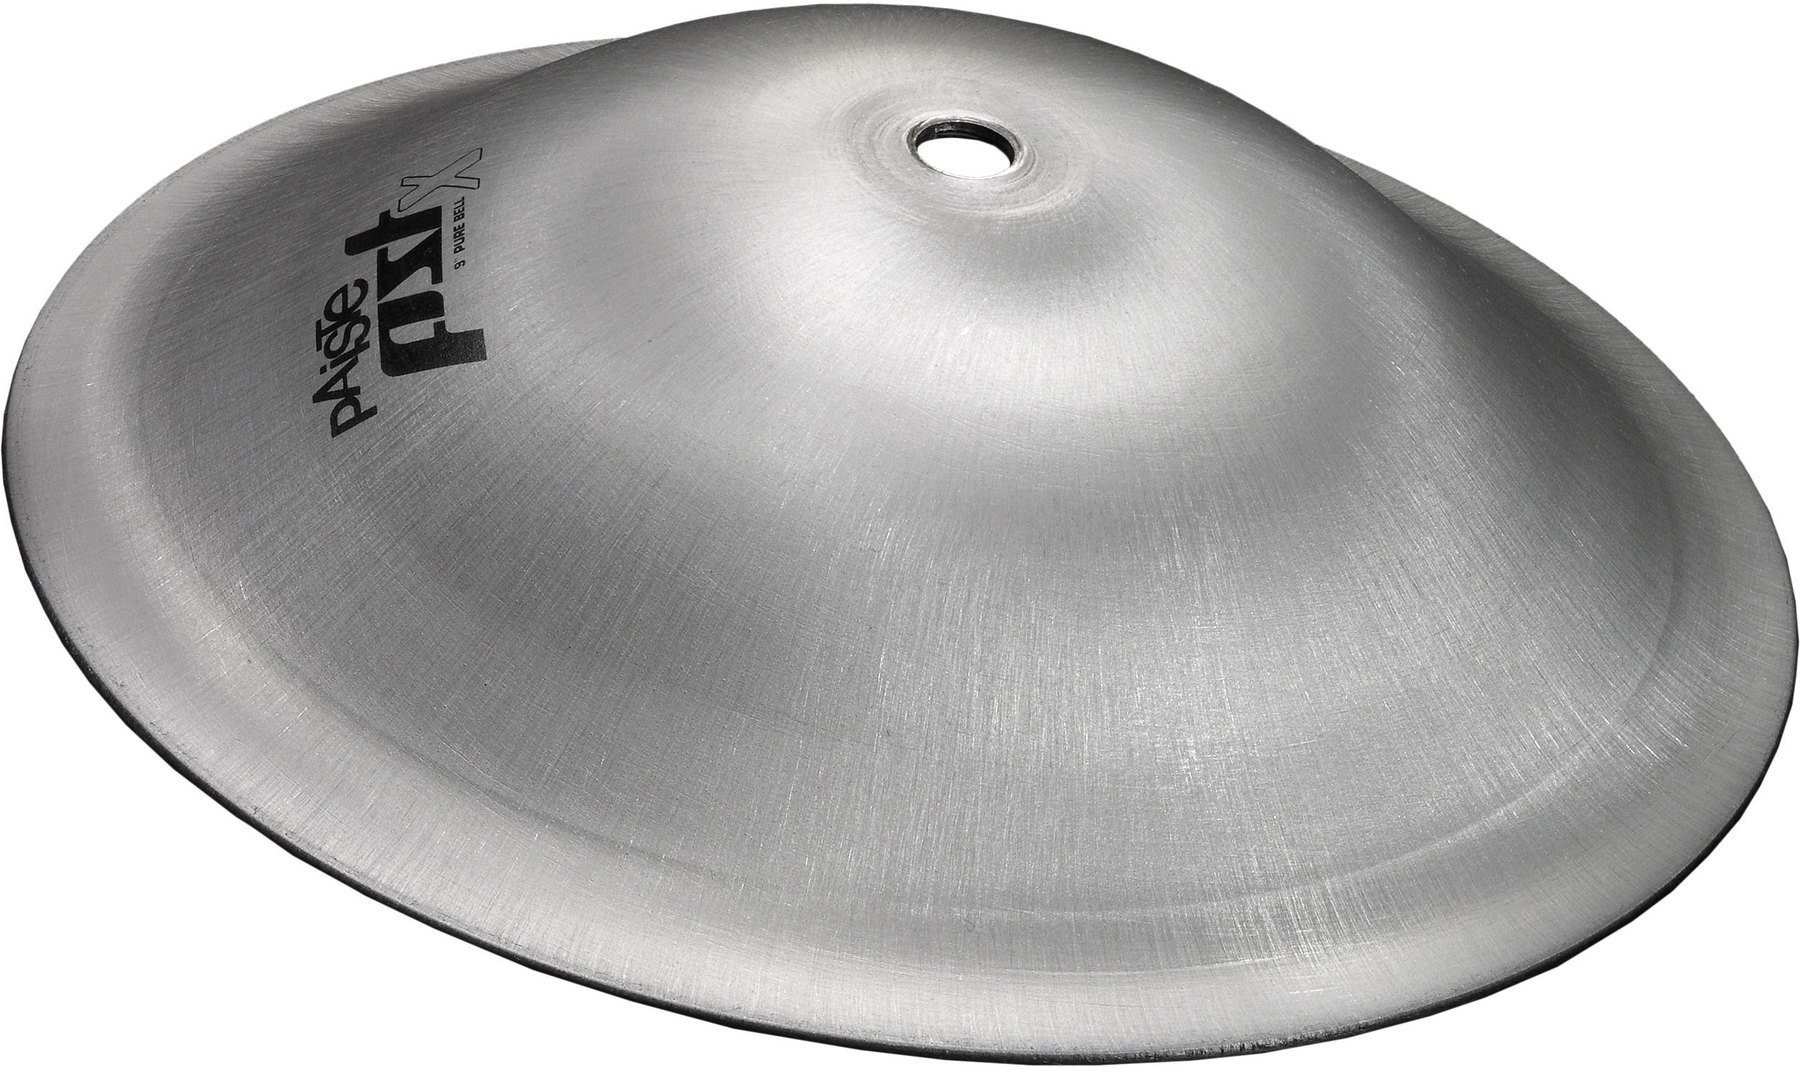 Effects Cymbal Paiste PST X Pure Bell Effects Cymbal 9"